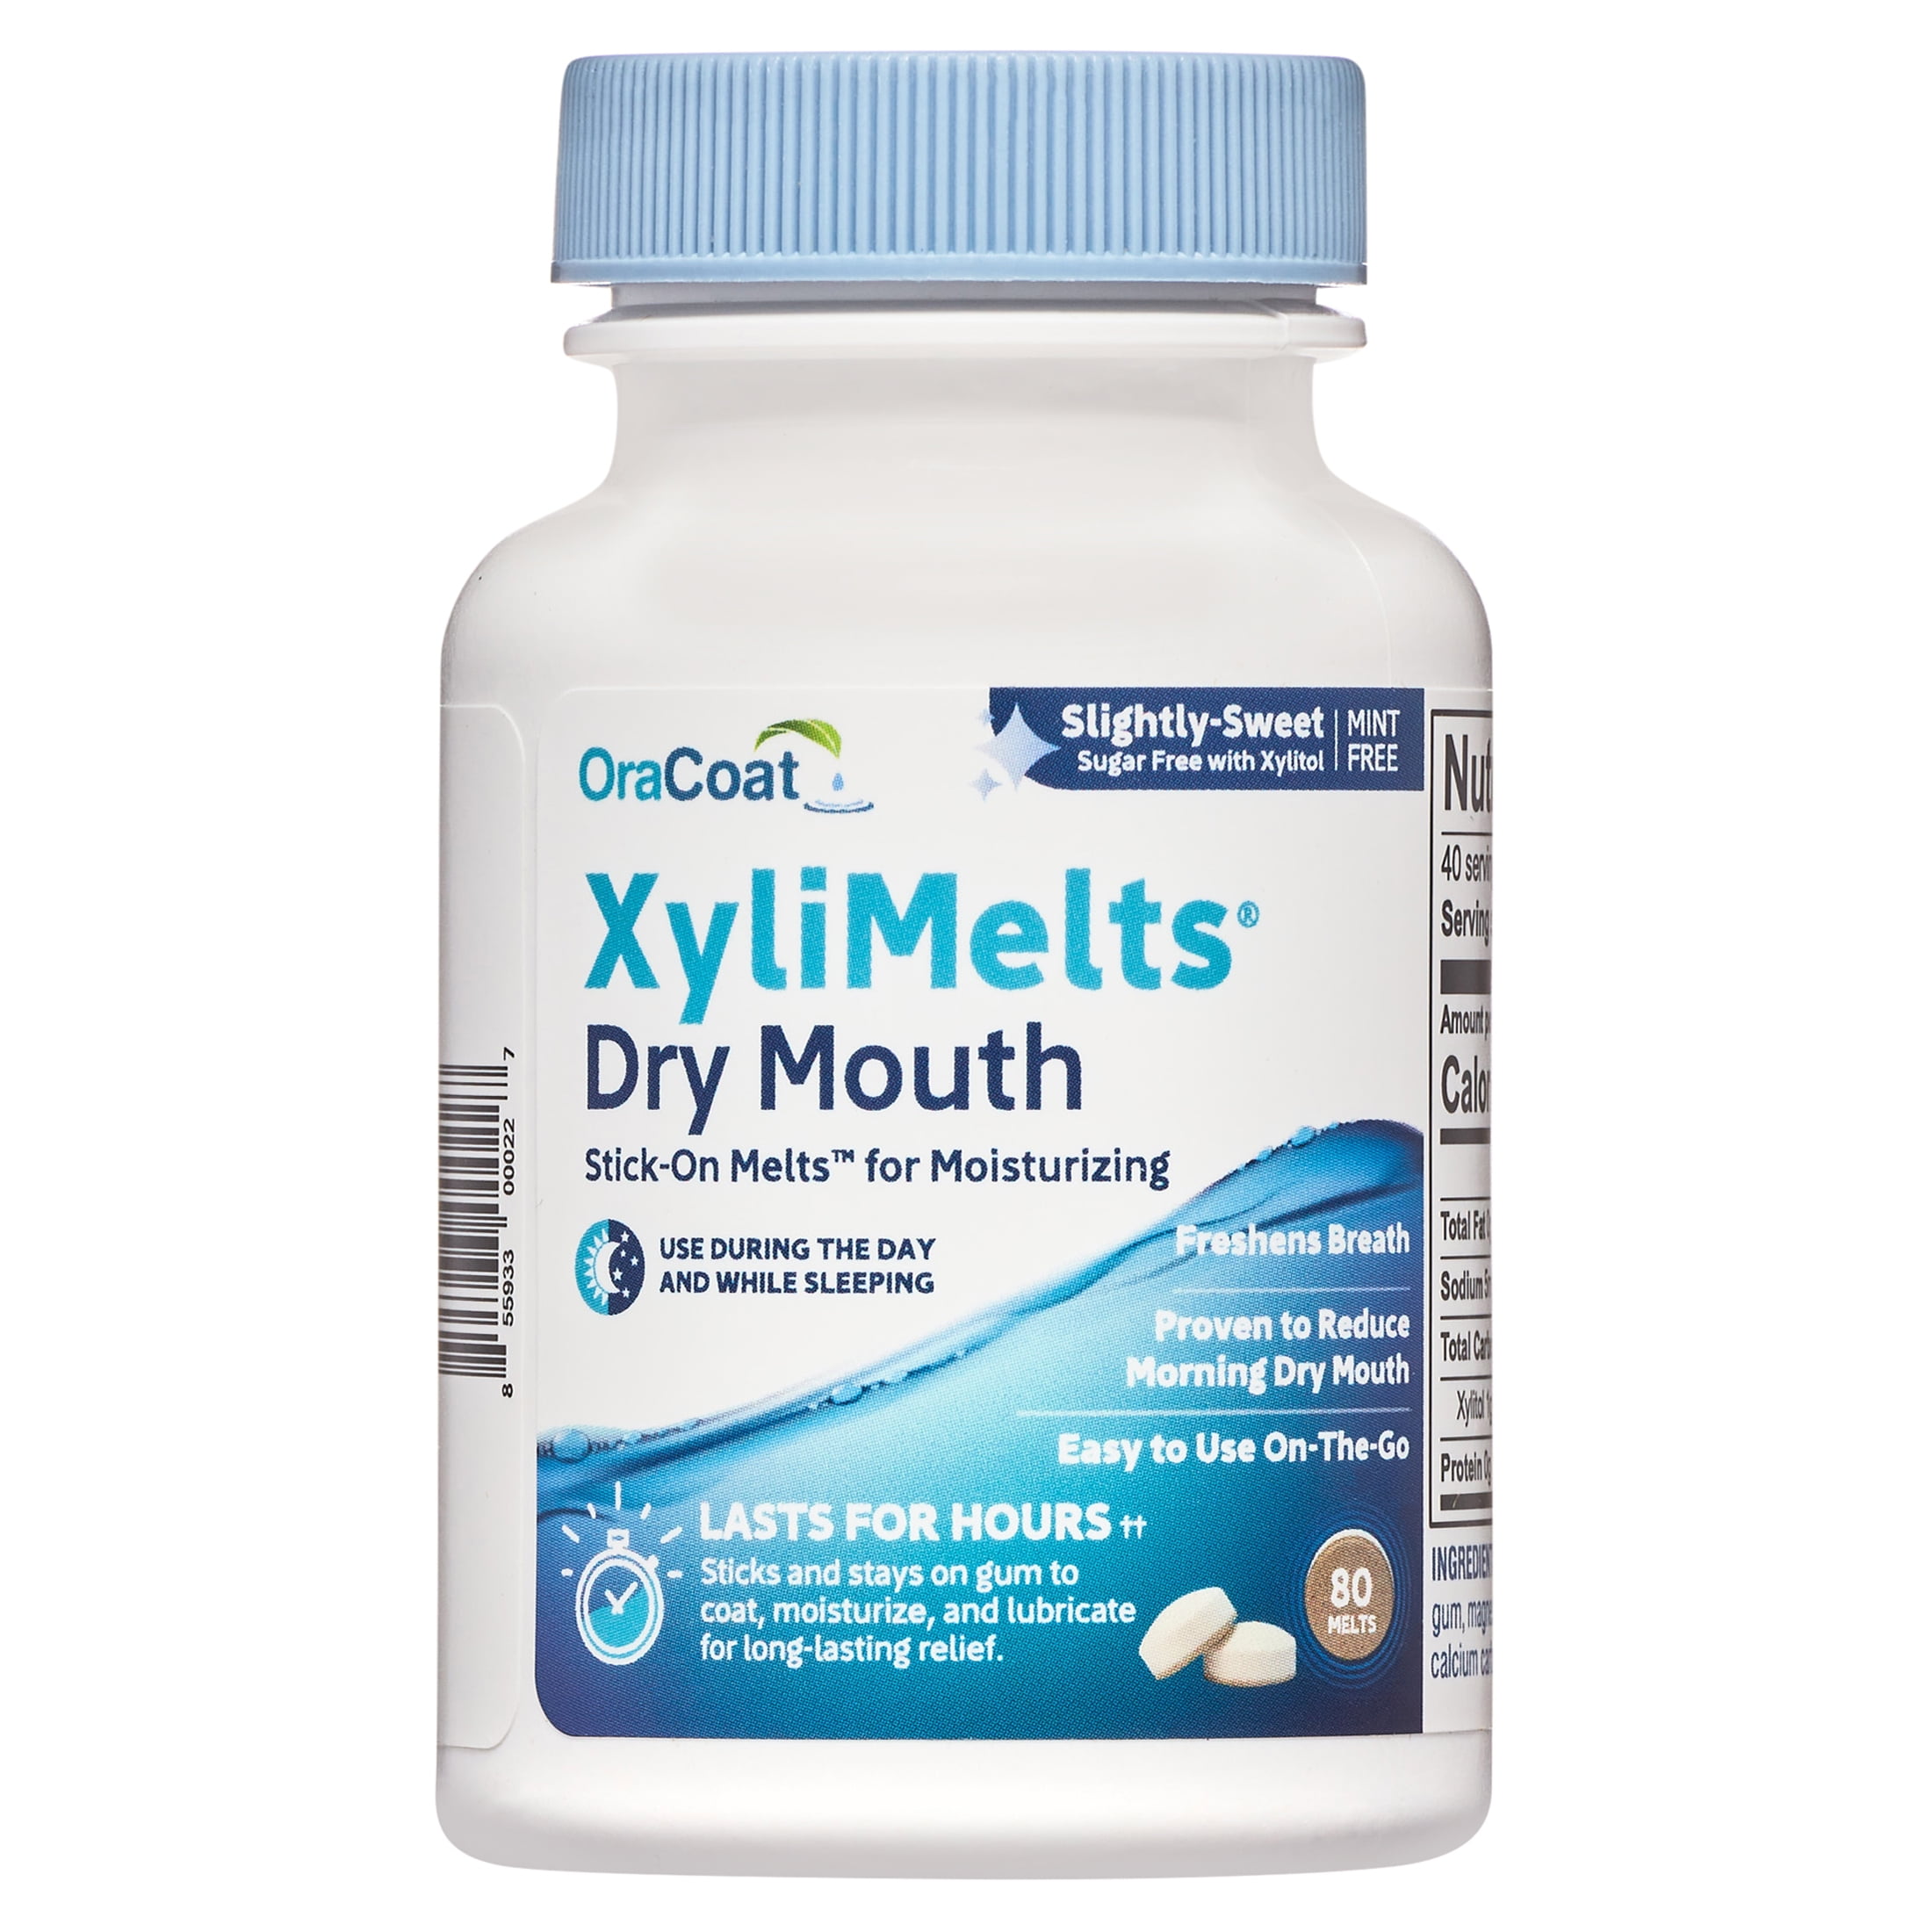 OraCoat XyliMelts for dry mouth, Mint Free - 80 count box